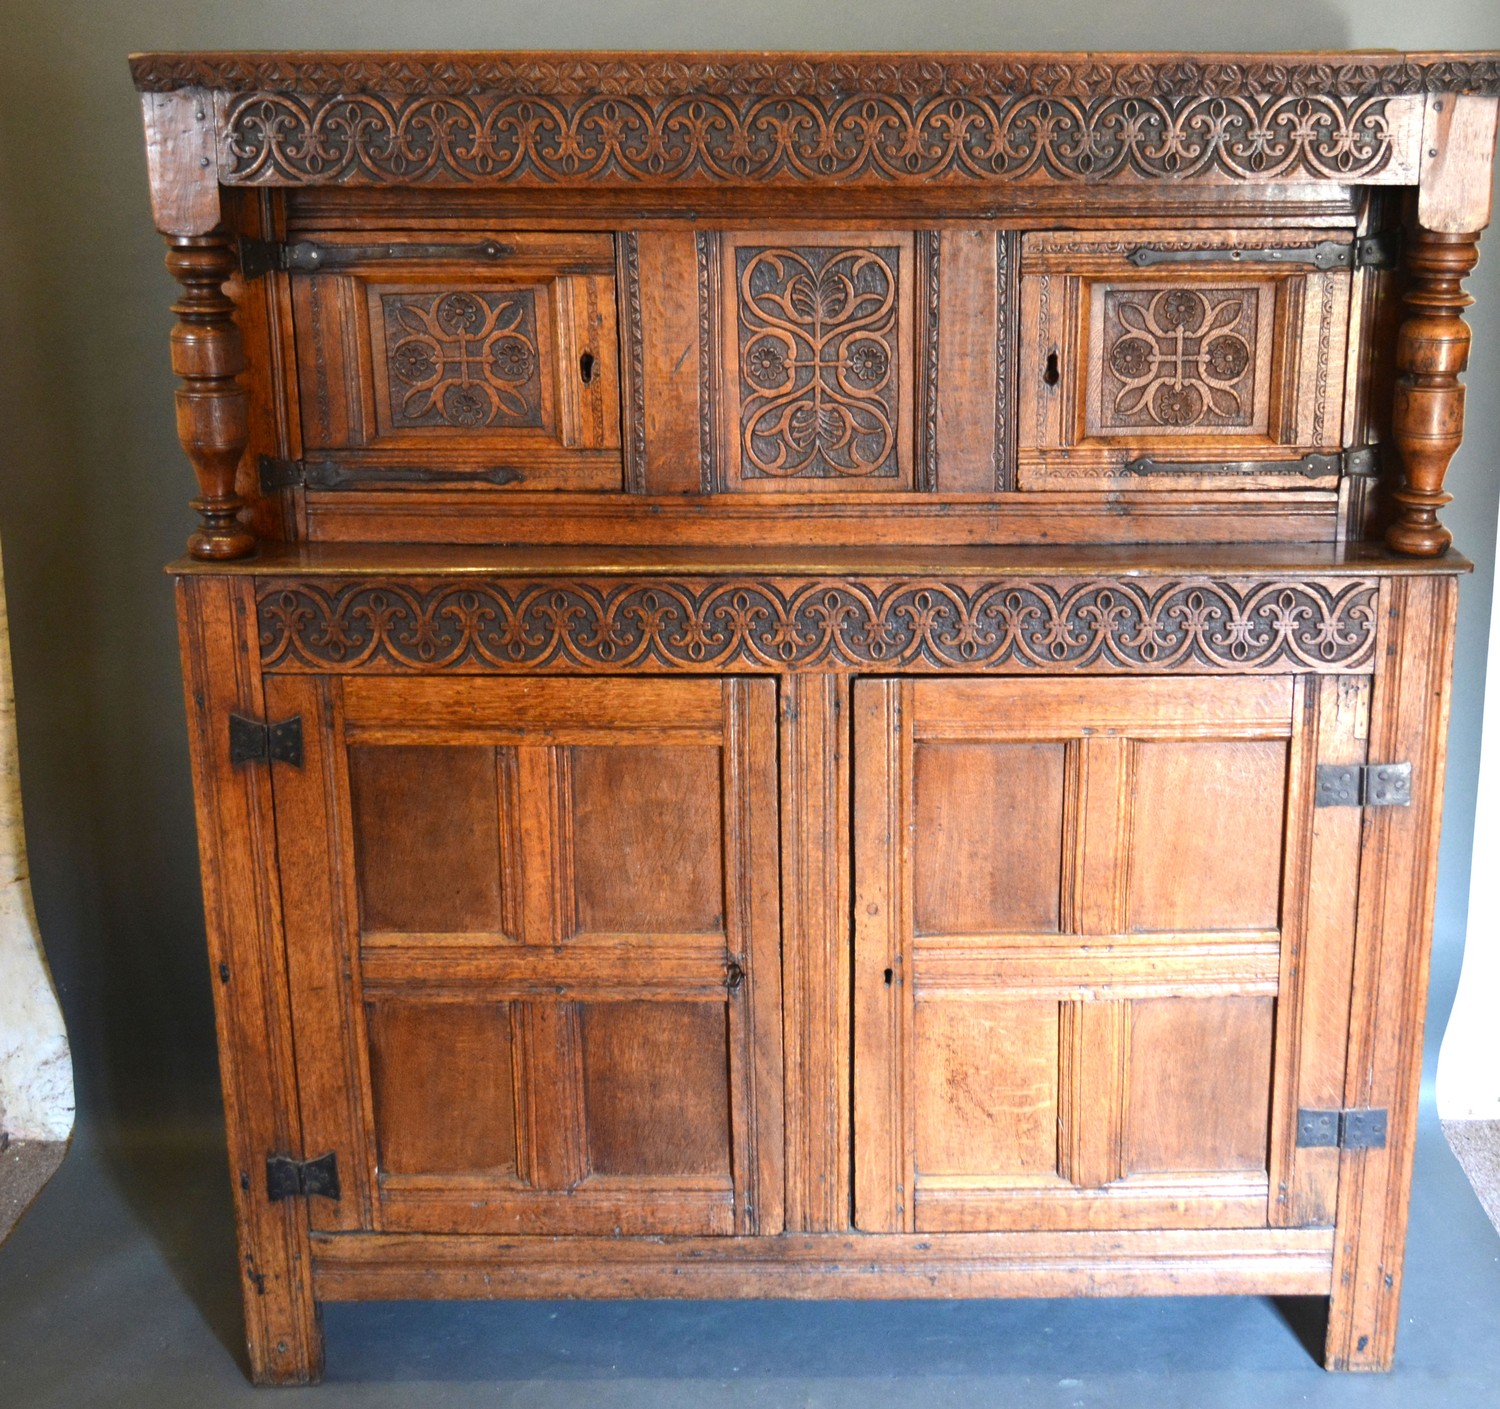 A George III Oak Court Cupboard with a carved frieze above a central carving flanked by doors, the